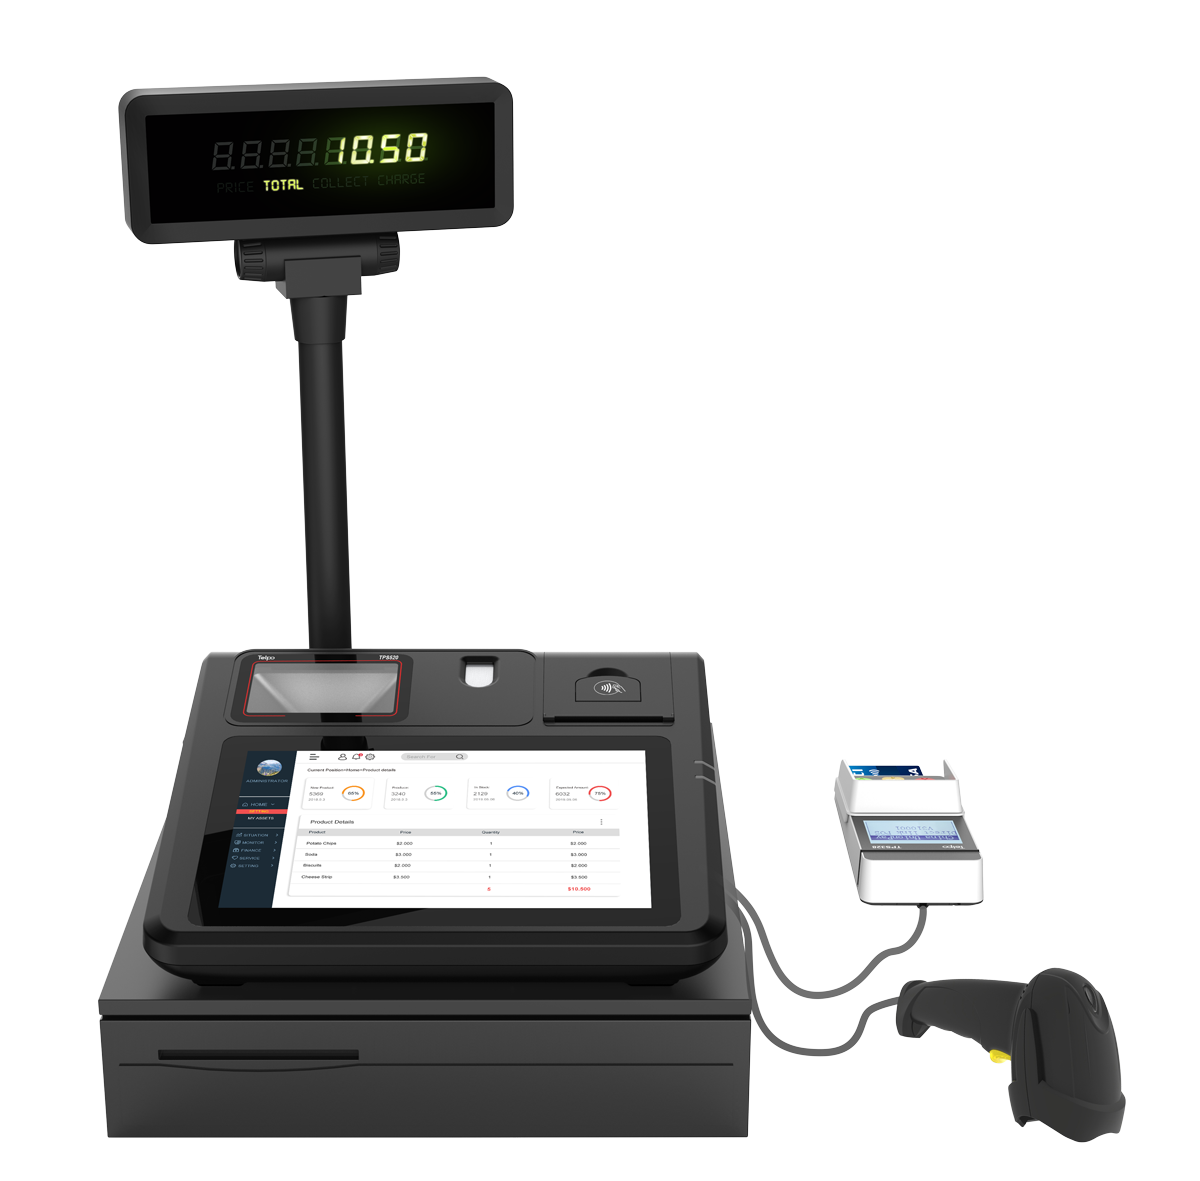 10-Inch Android All-in-one Desktop POS Terminal